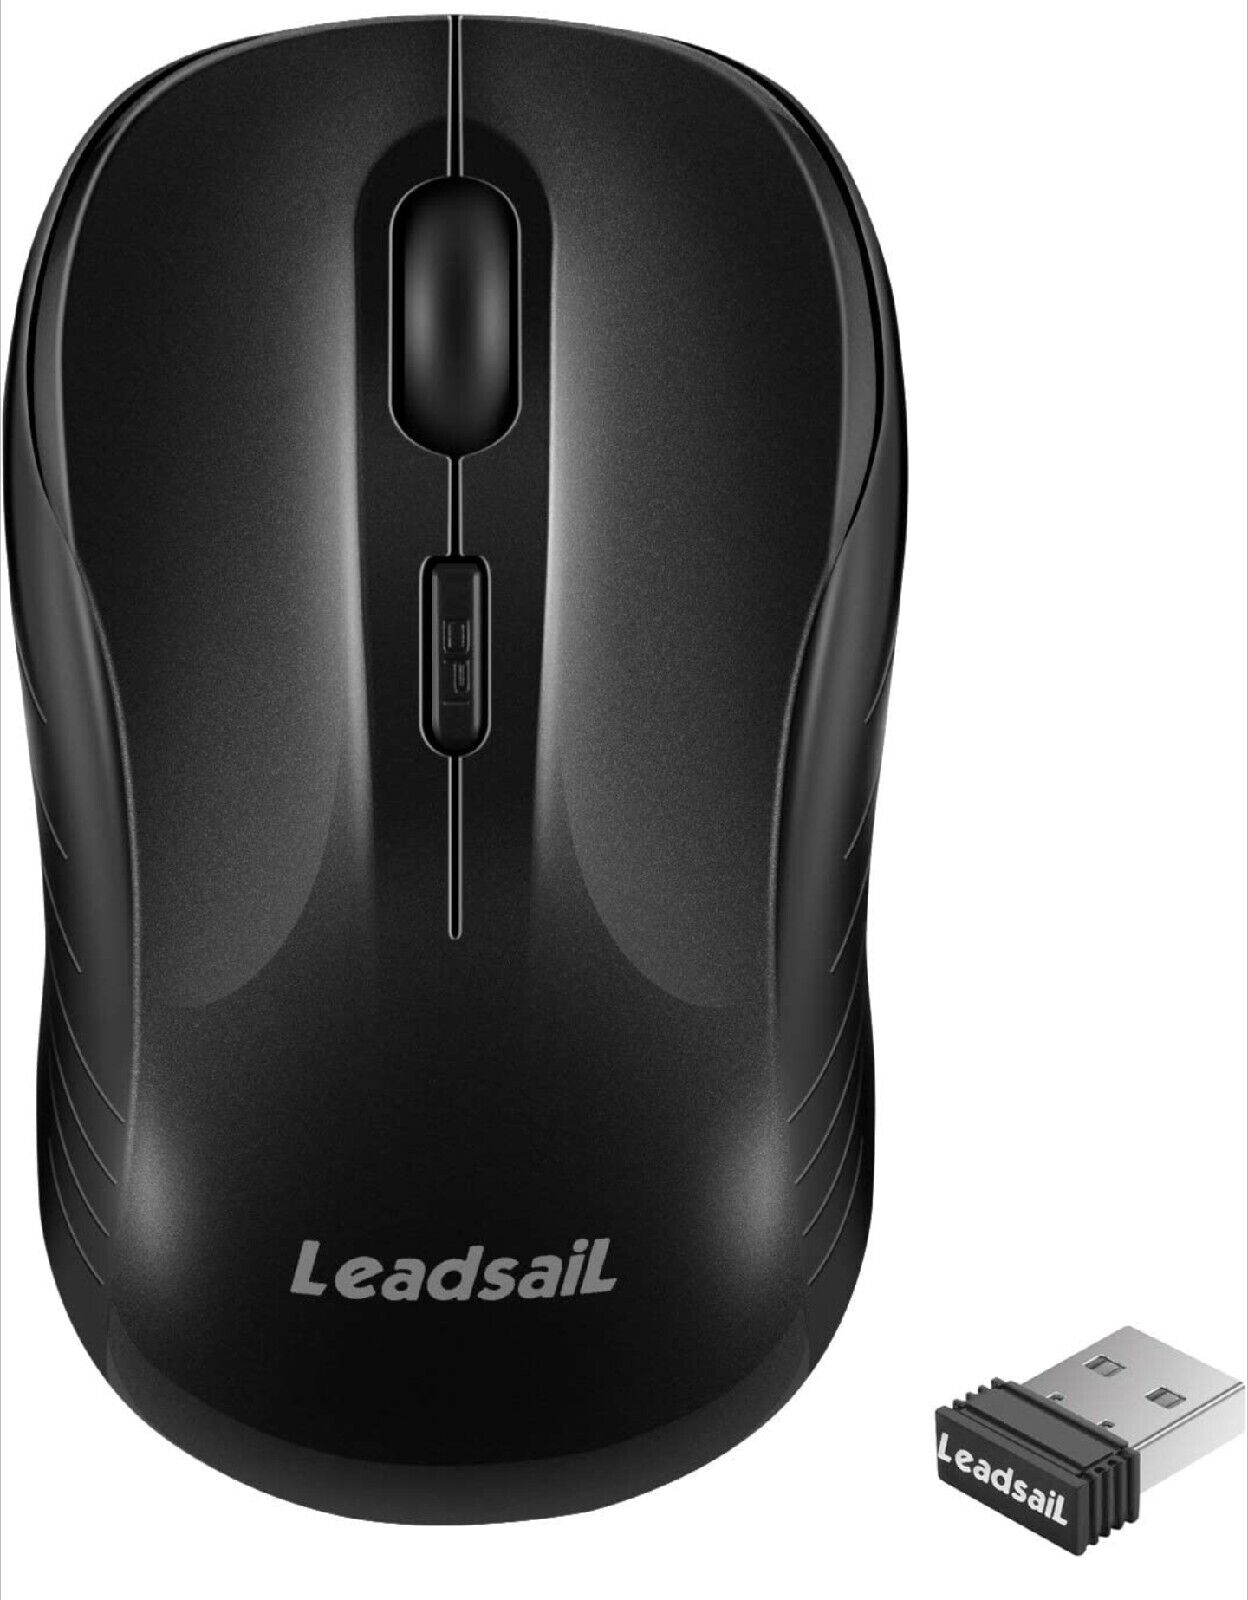 LeadsaiL Wireless Mouse Silent 2.4G USB Computer Mouse Compact Optical Cordless